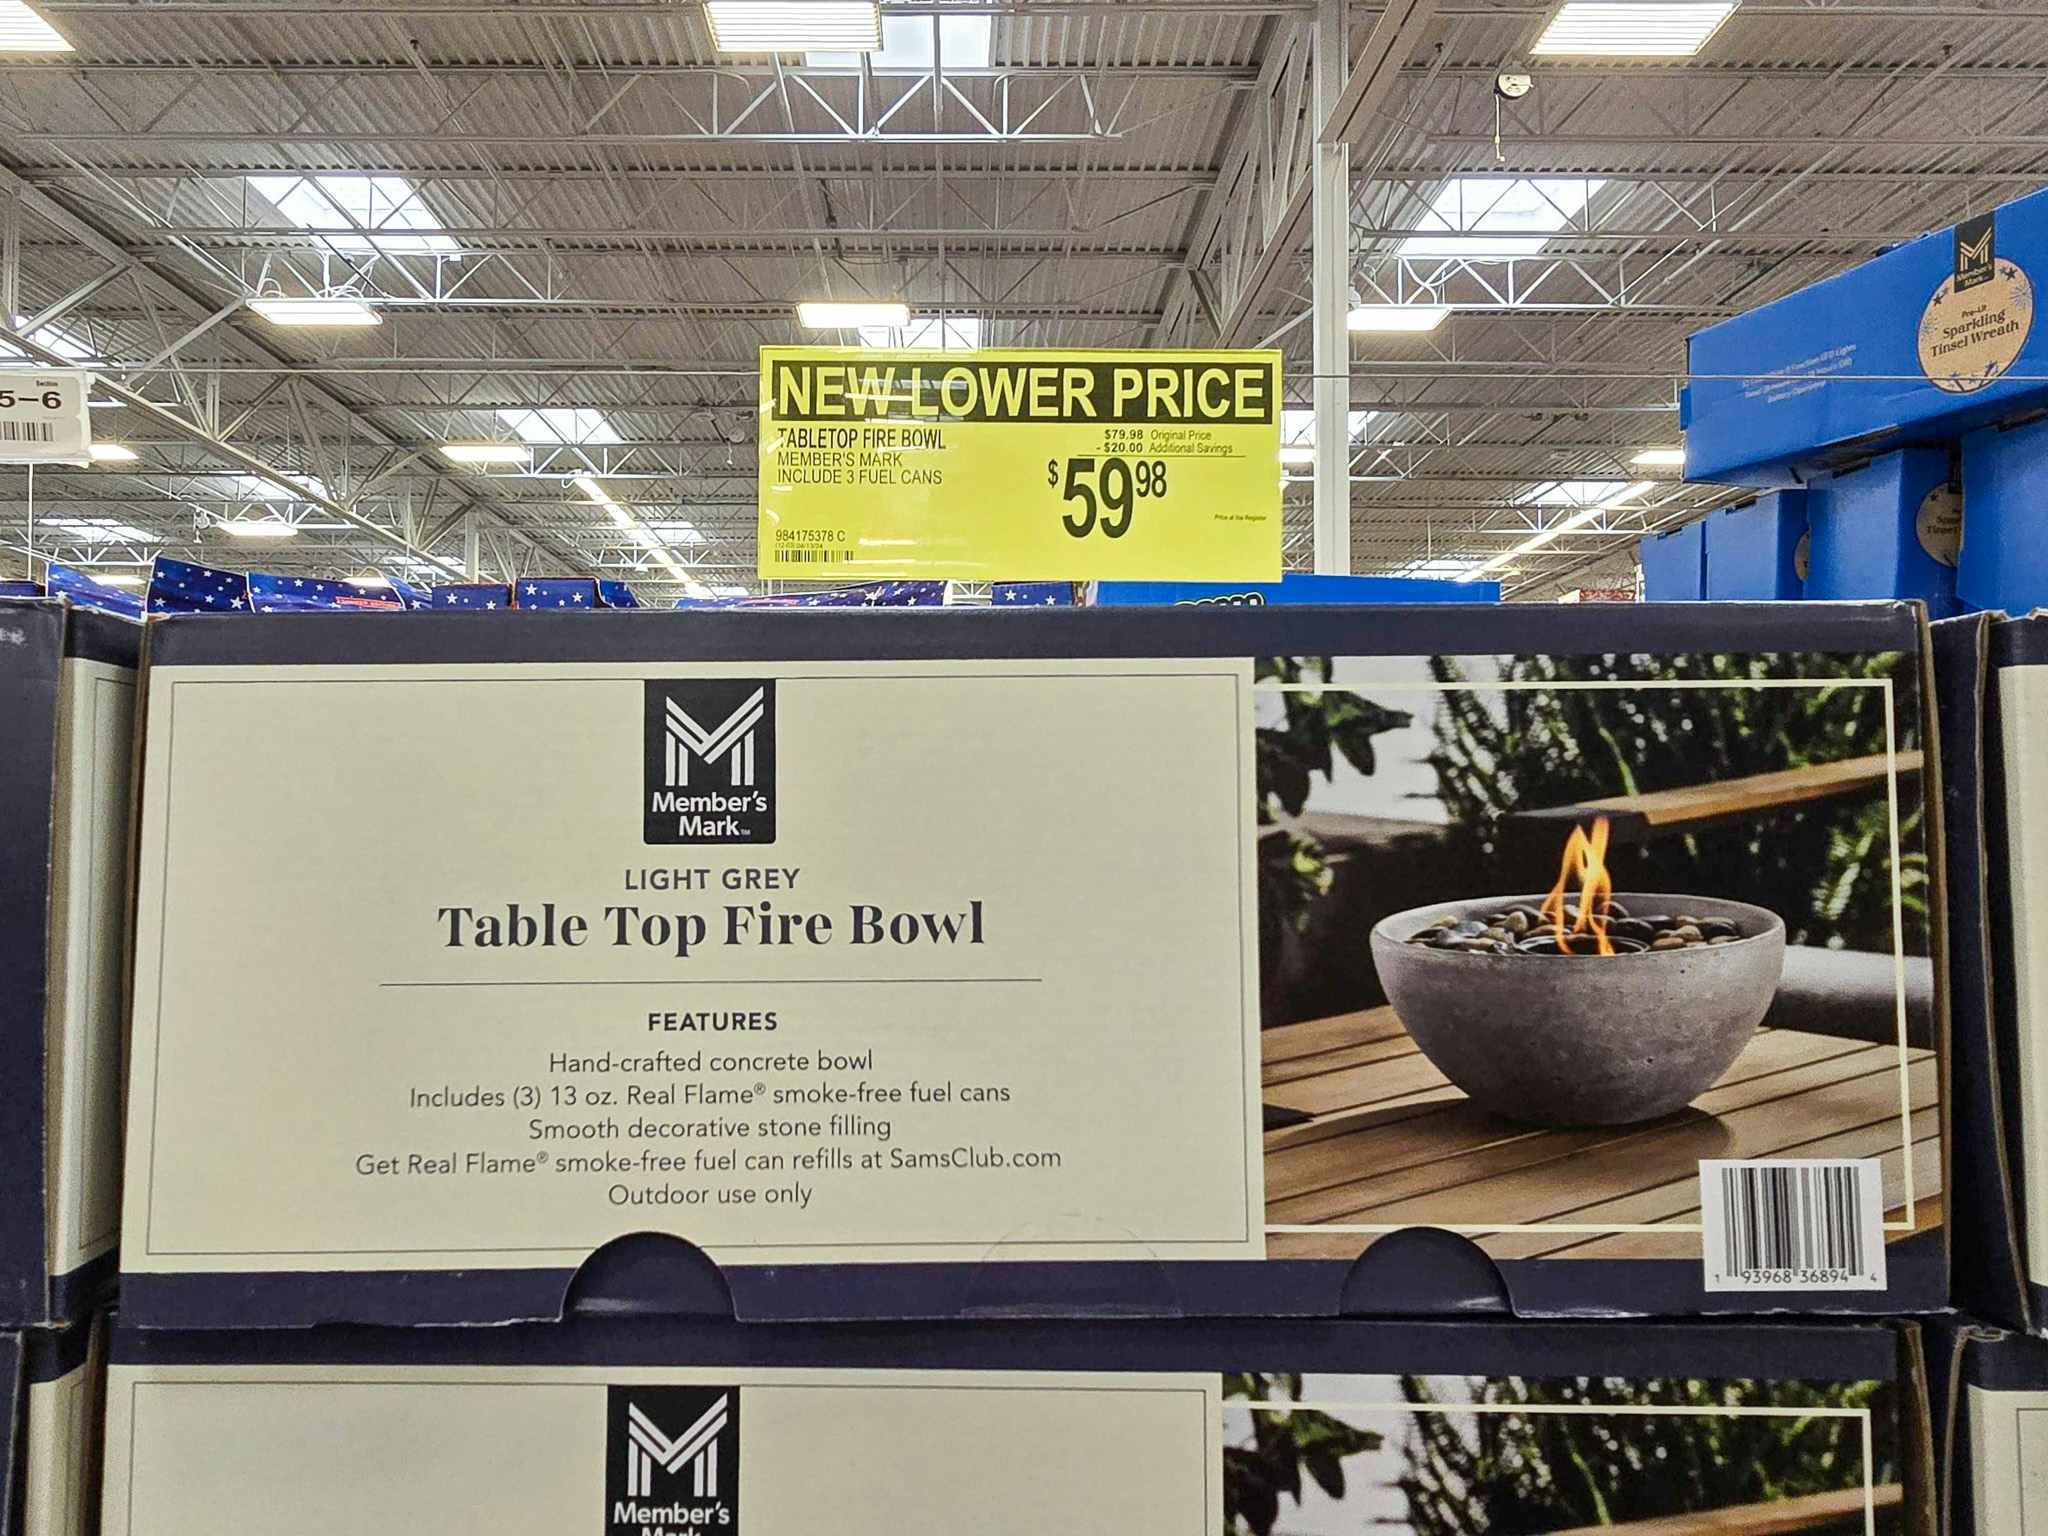 table top fire bowl with a price sign for $59.98